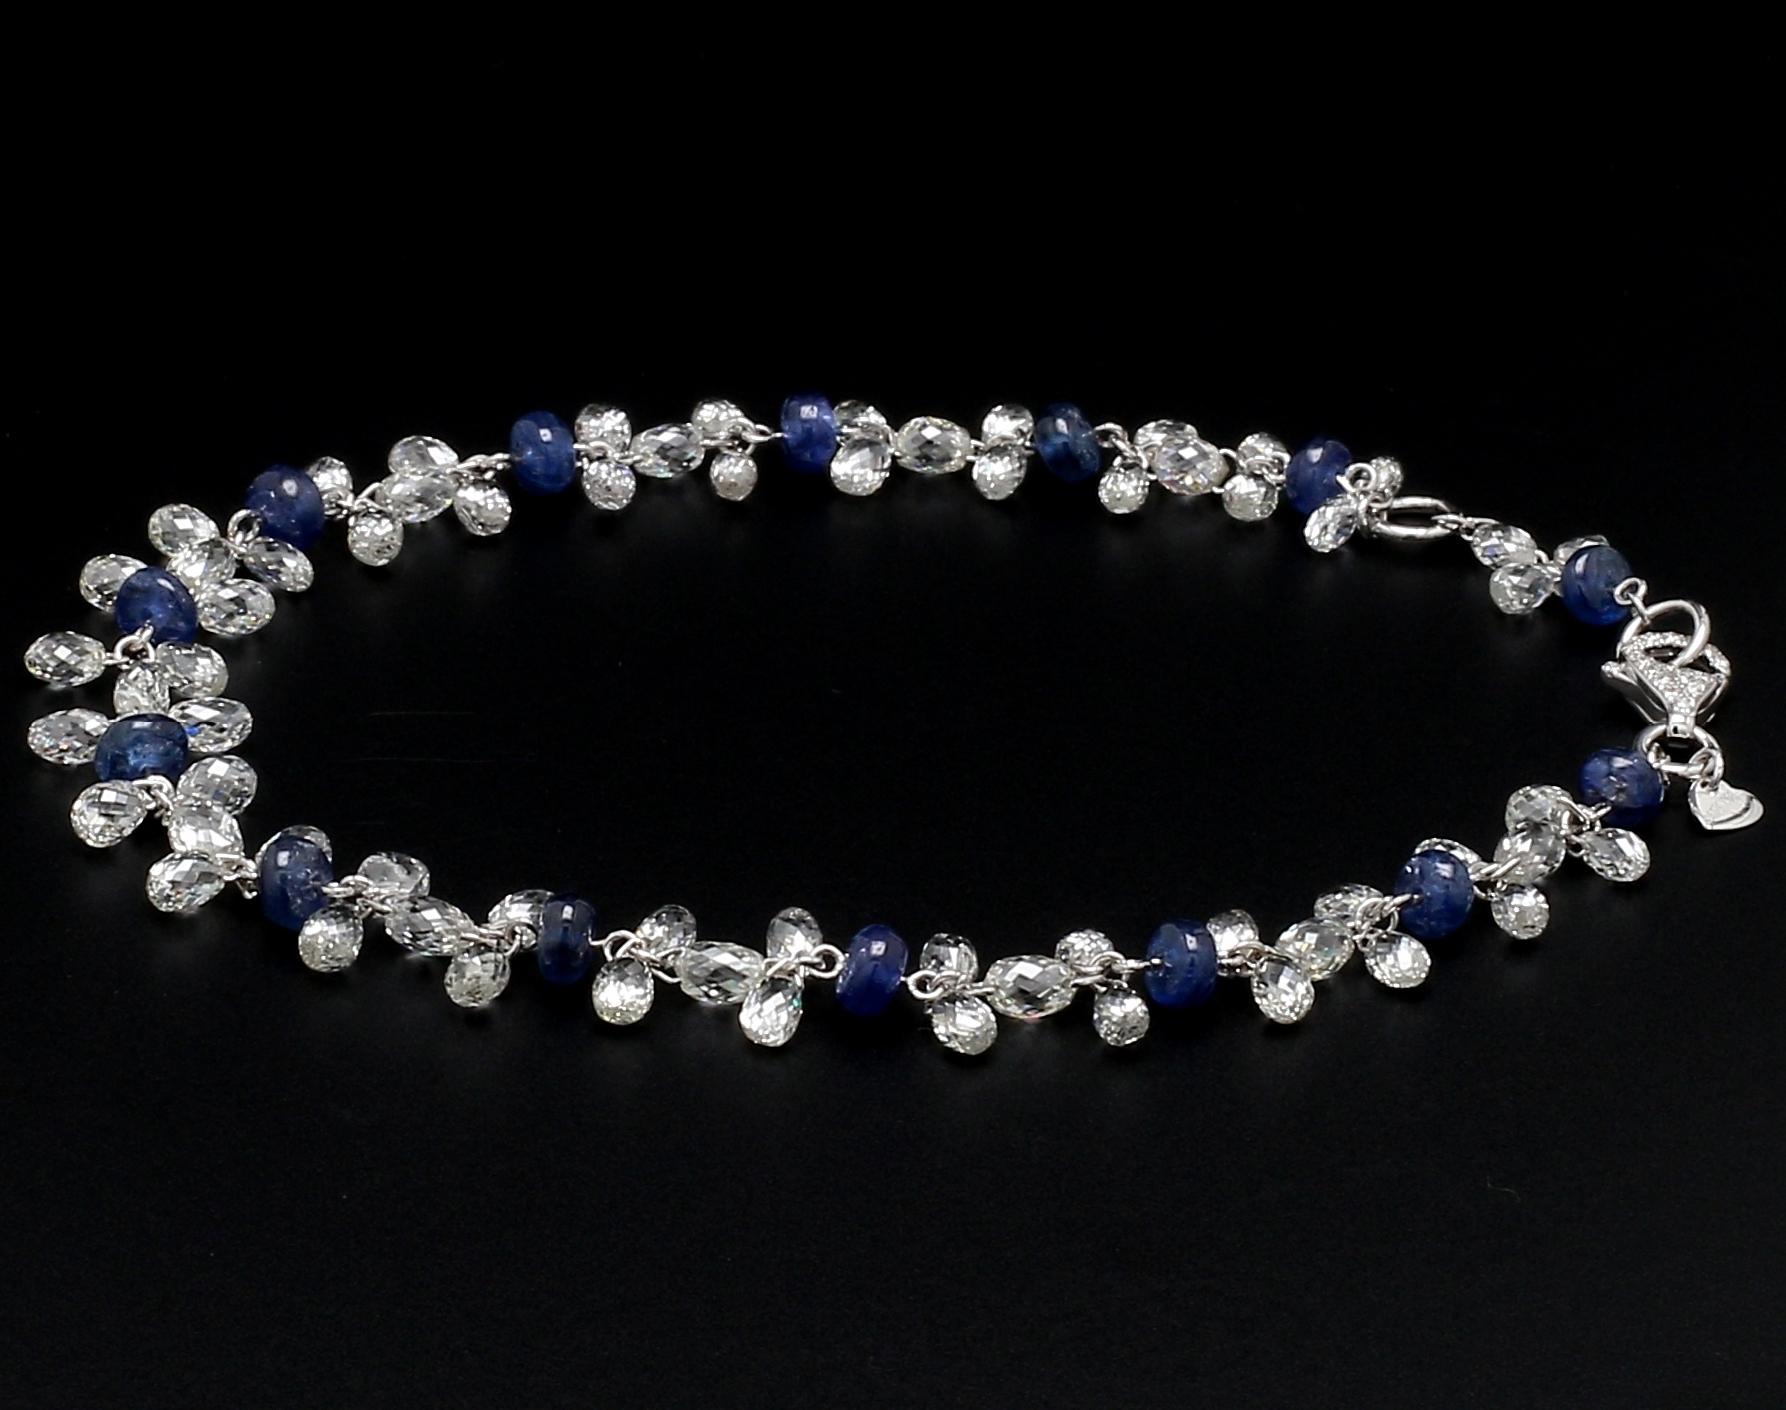 PANIM Diamond Briolette & Sapphire 18K White Gold Dangling Bracelet

Bracelets are worn to enhance the look. Women love to look good. Women often wear exquisite gold bracelets on their wrists, and this is quite usual. Every woman should own a